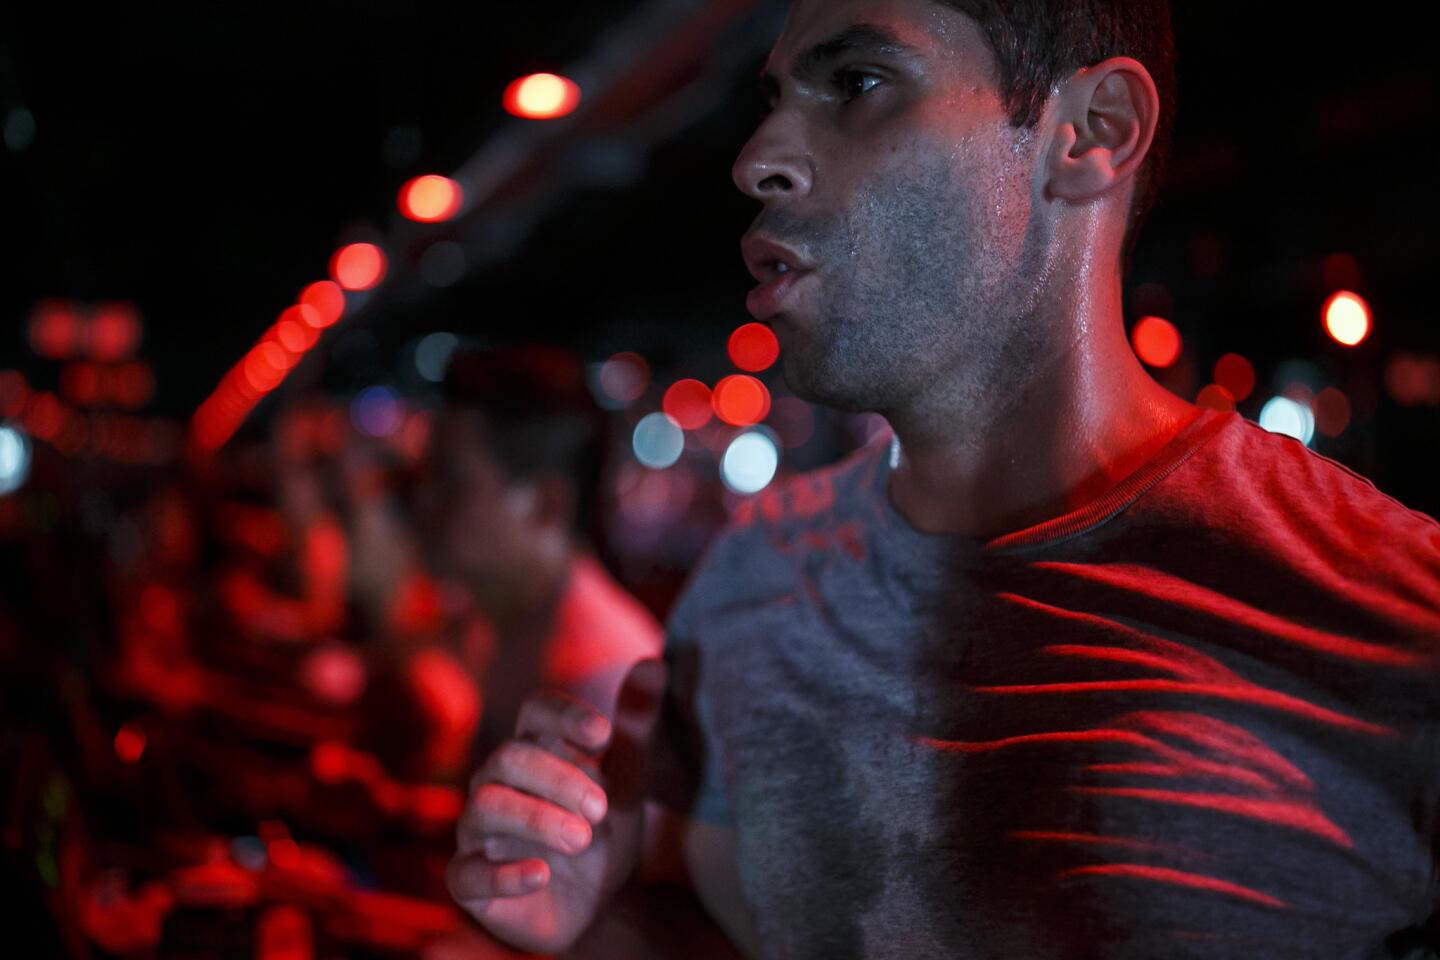 Barry's Bootcamp has customers breathing hard during a workout session focusing on legs and glutes.